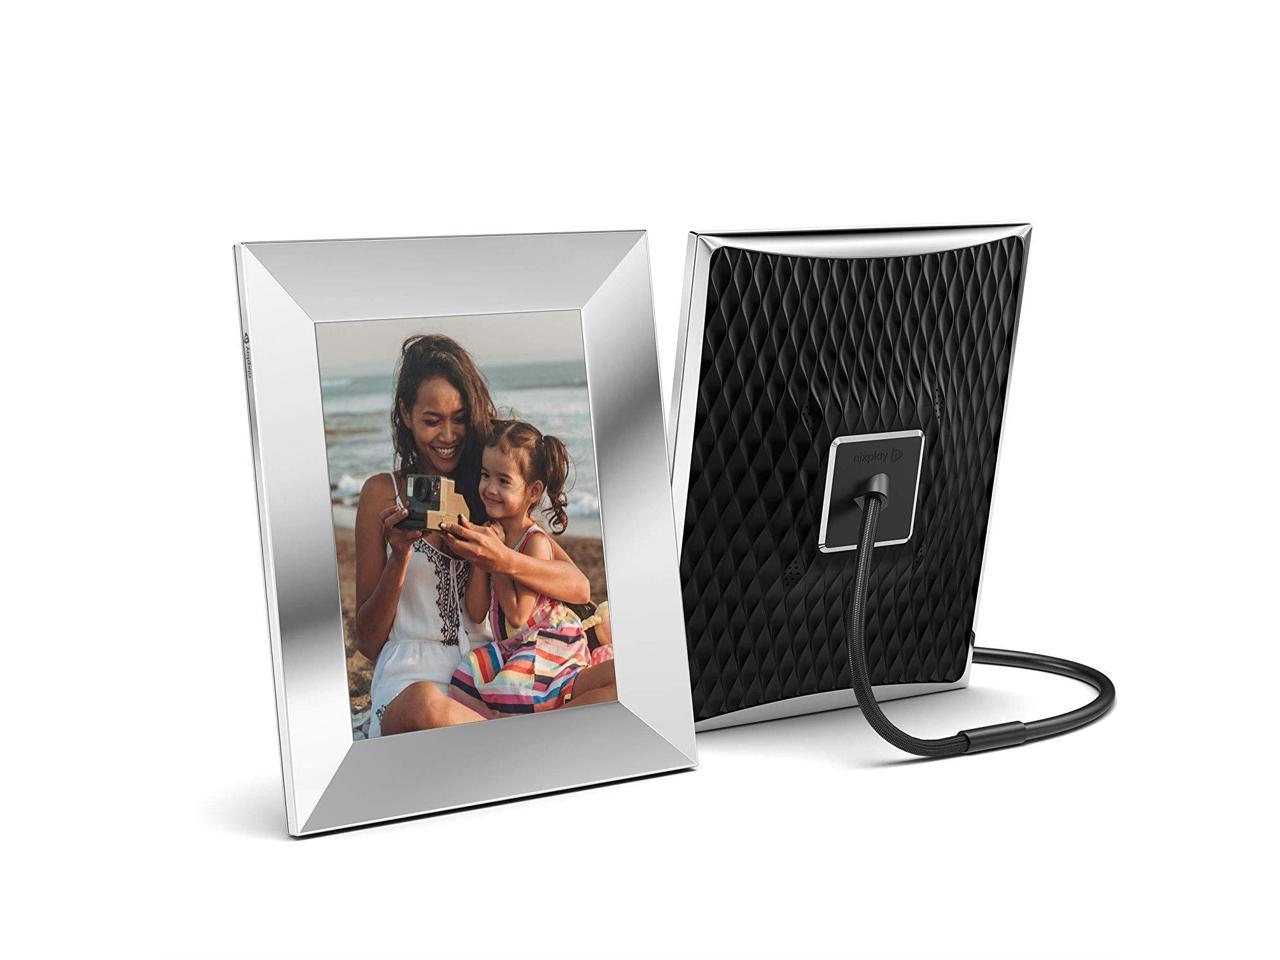 Nixplay 9.7 Inch Smart Photo Frame with 2K Ultra HD Resolution - Wifi Digital Photo Frame with Web/Mobile App & Social Media Integration - Metal (W10G)